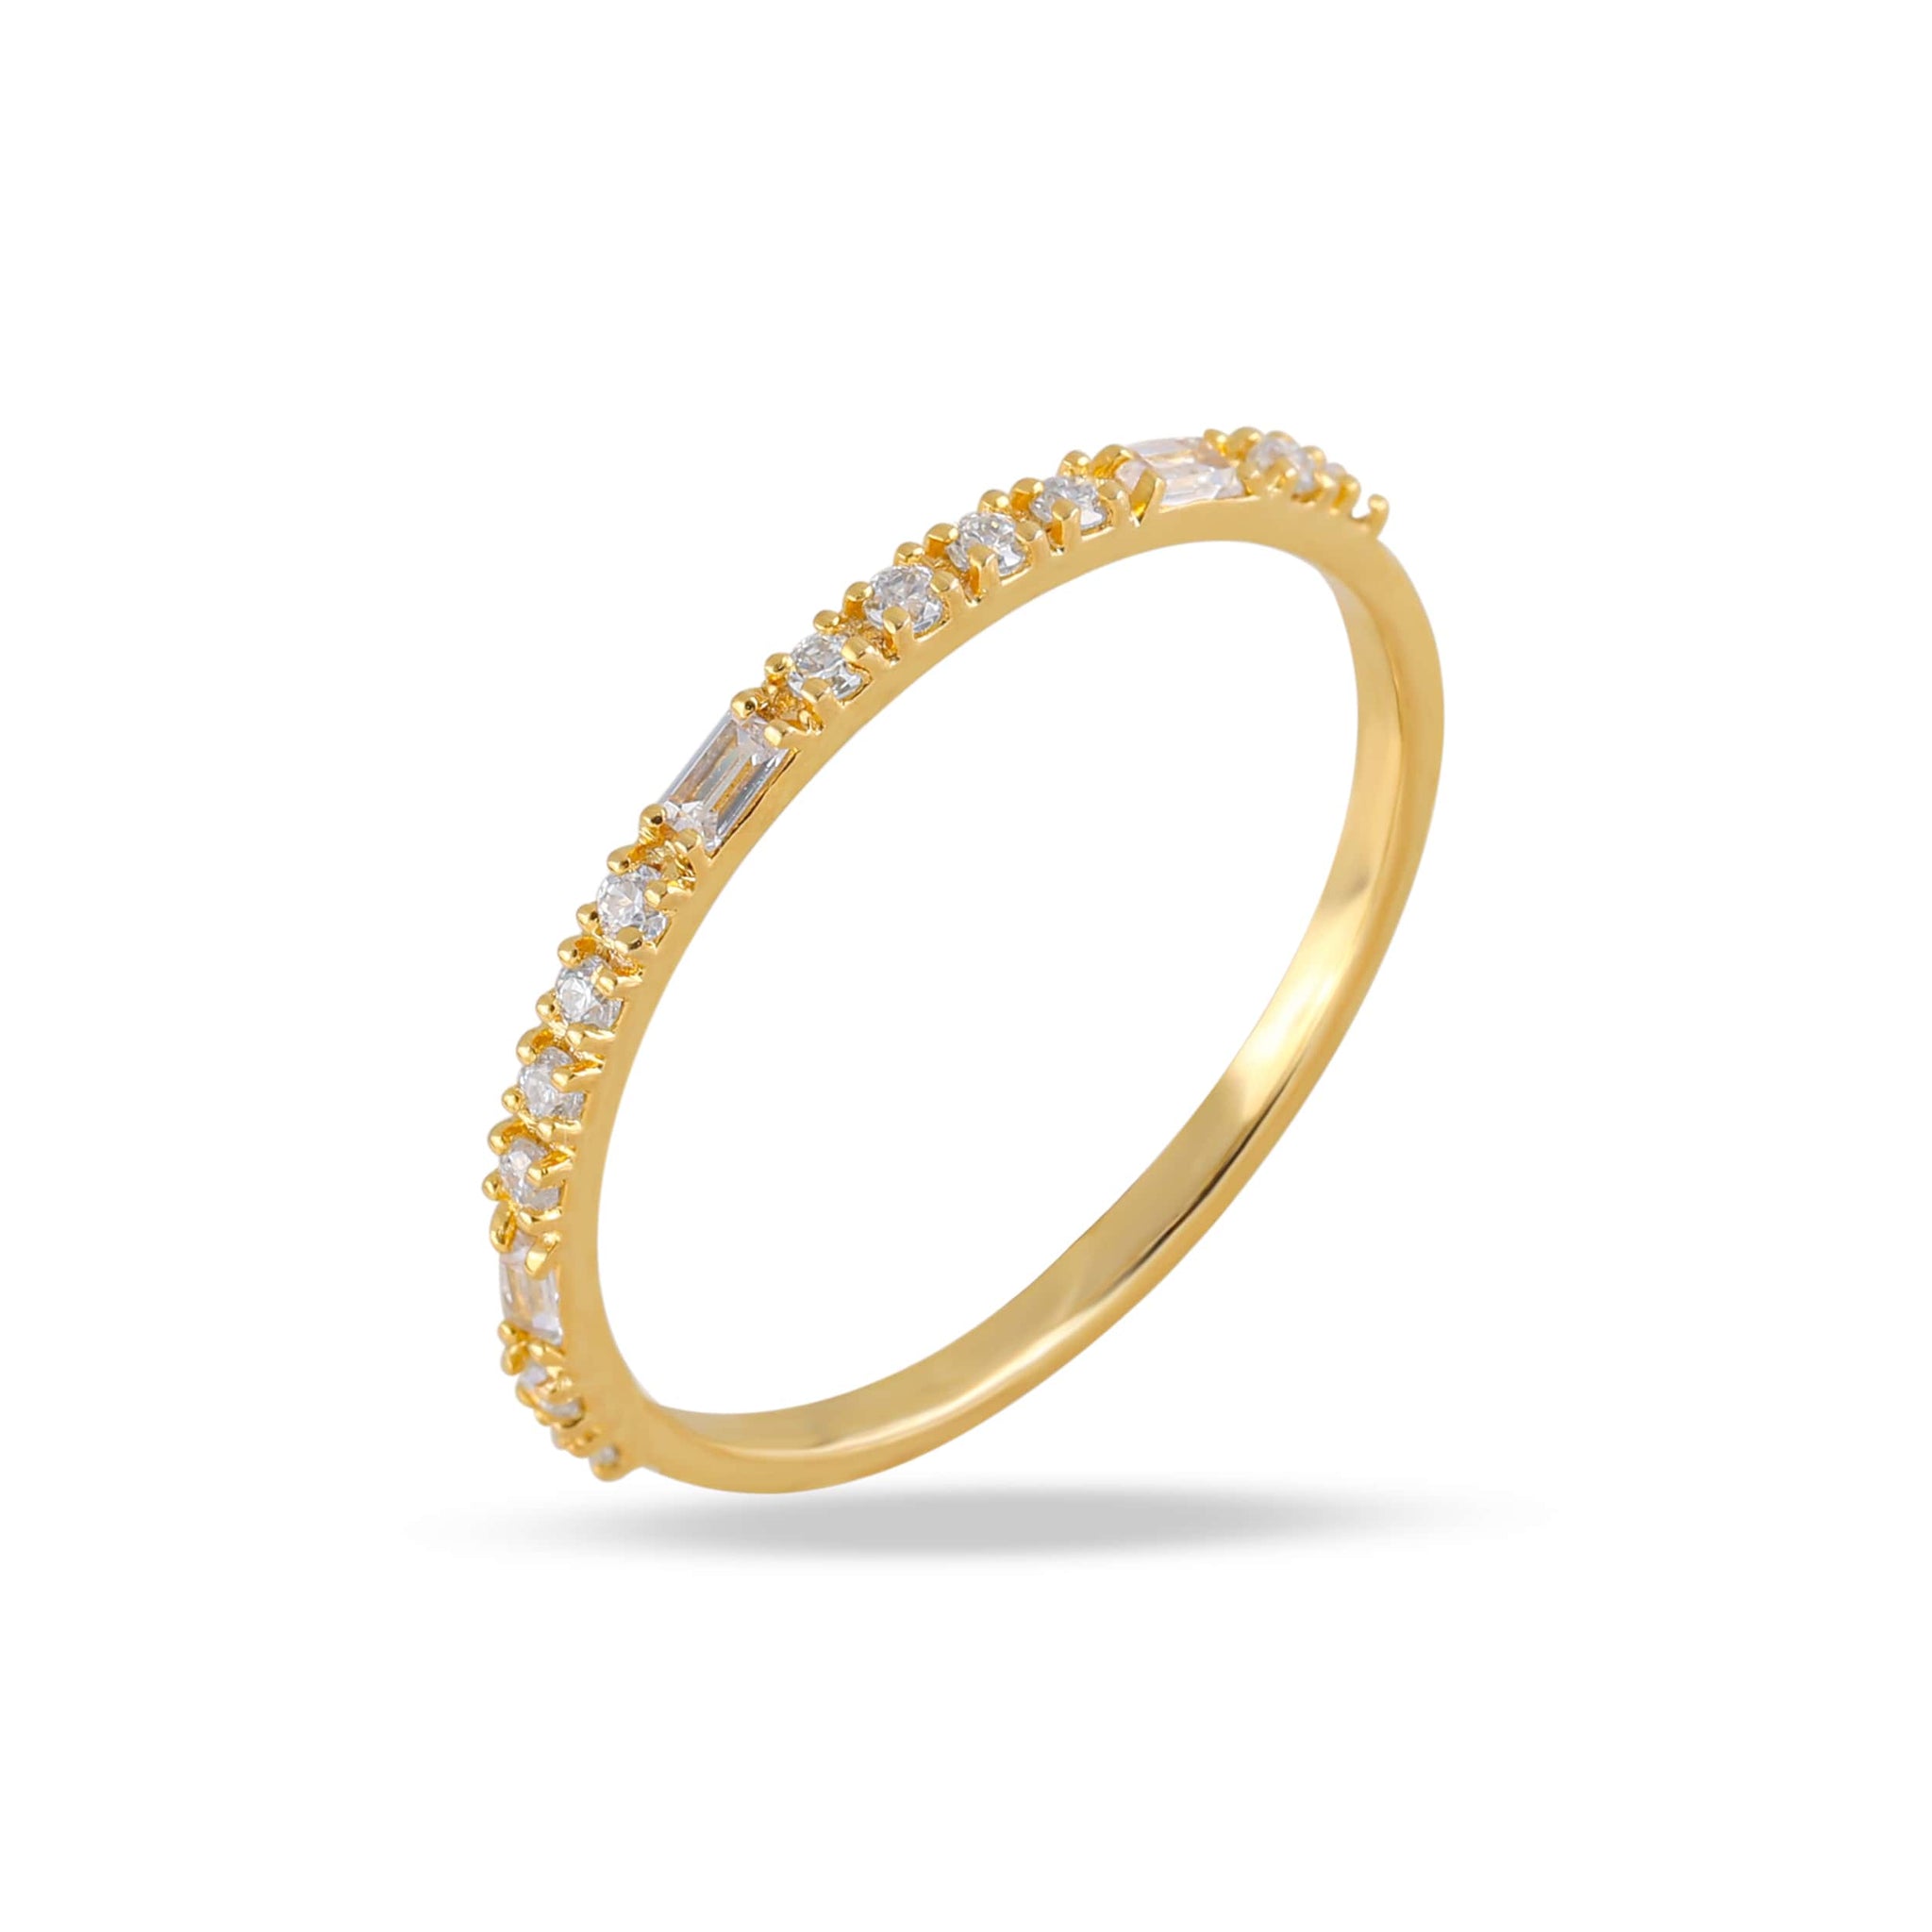 Baguette and Round diamond wedding band